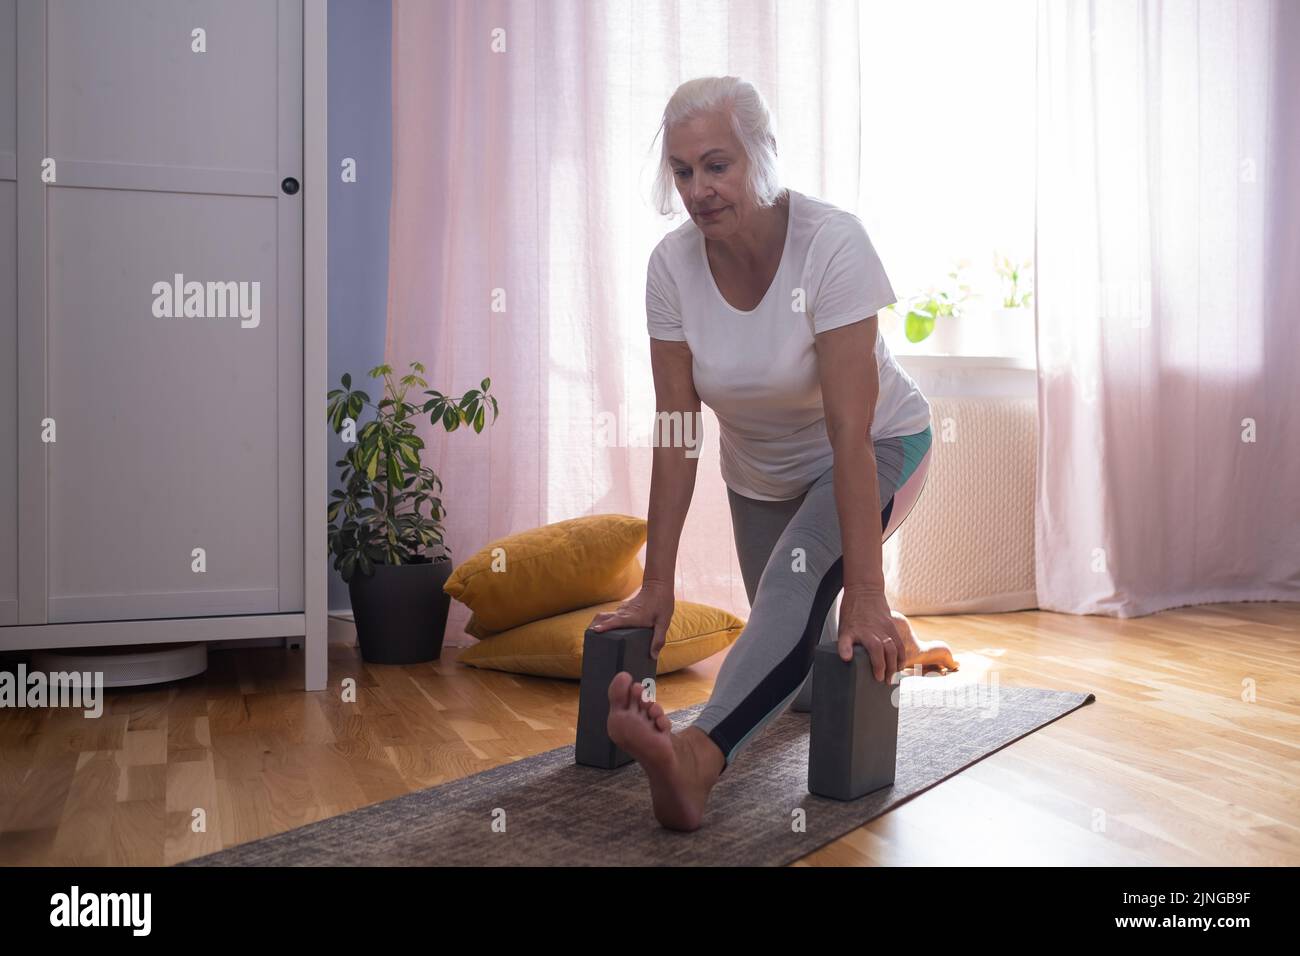 Senior aged woman sitting on the yoga mat and stretching her legs and back using blocks in the living room. Stock Photo